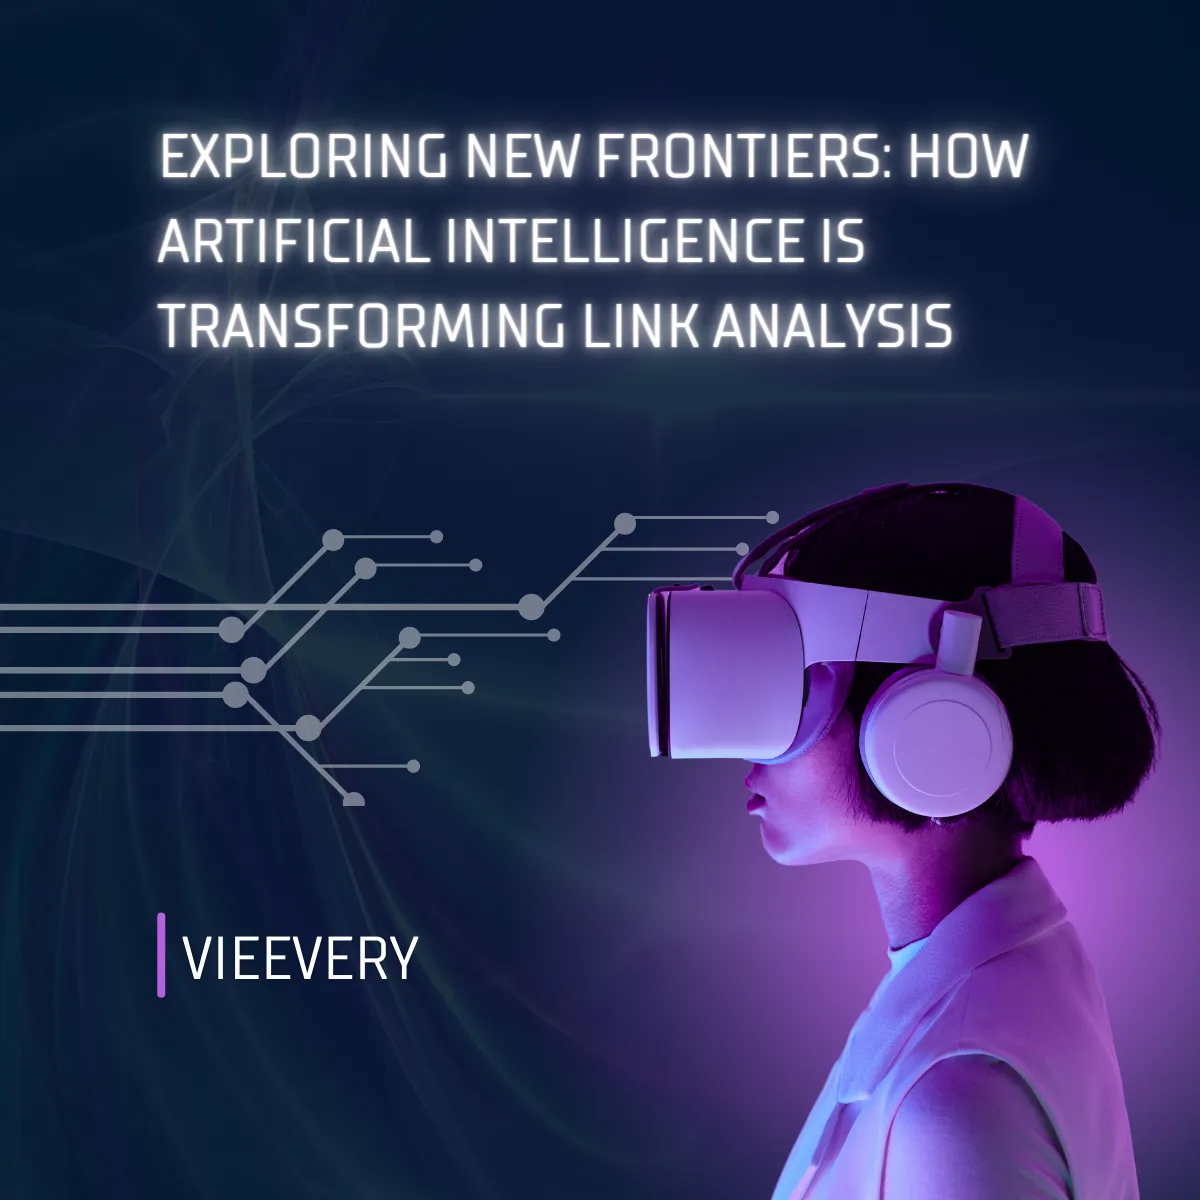 Exploring New Frontiers: How Artificial Intelligence is Transforming Link Analysis